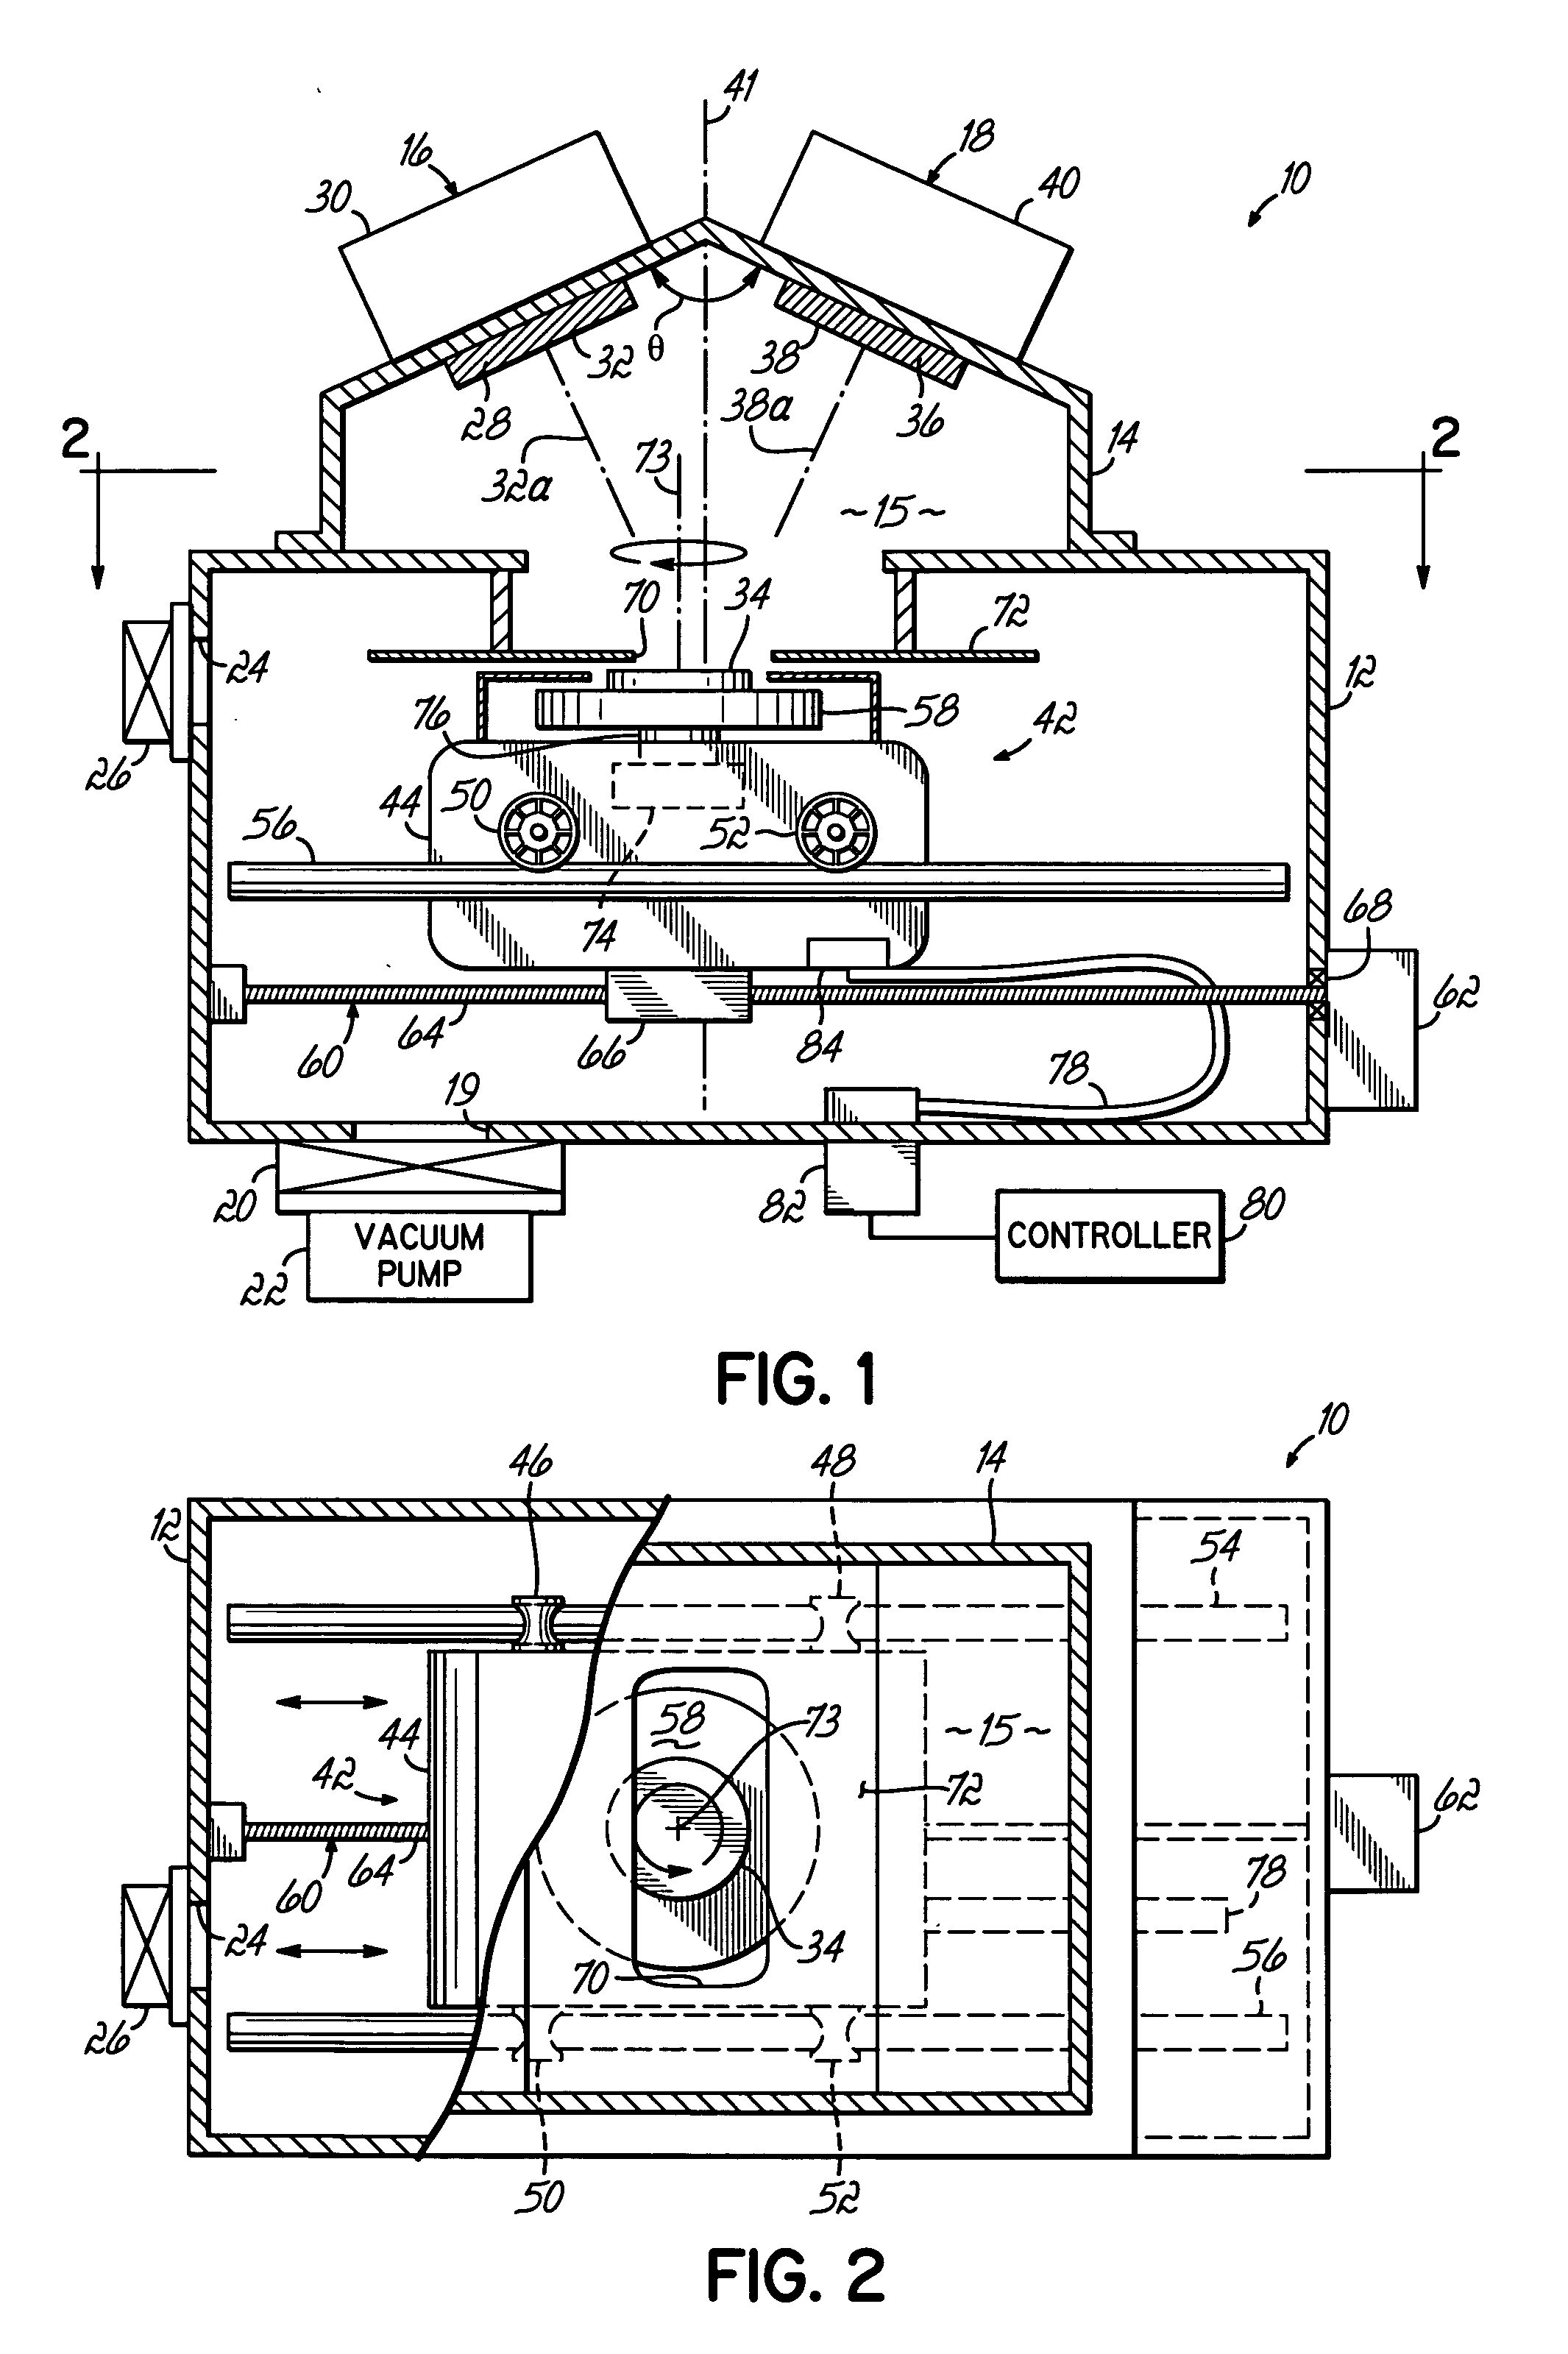 Physical vapor deposition apparatus for depositing thin multilayer films and methods of depositing such films